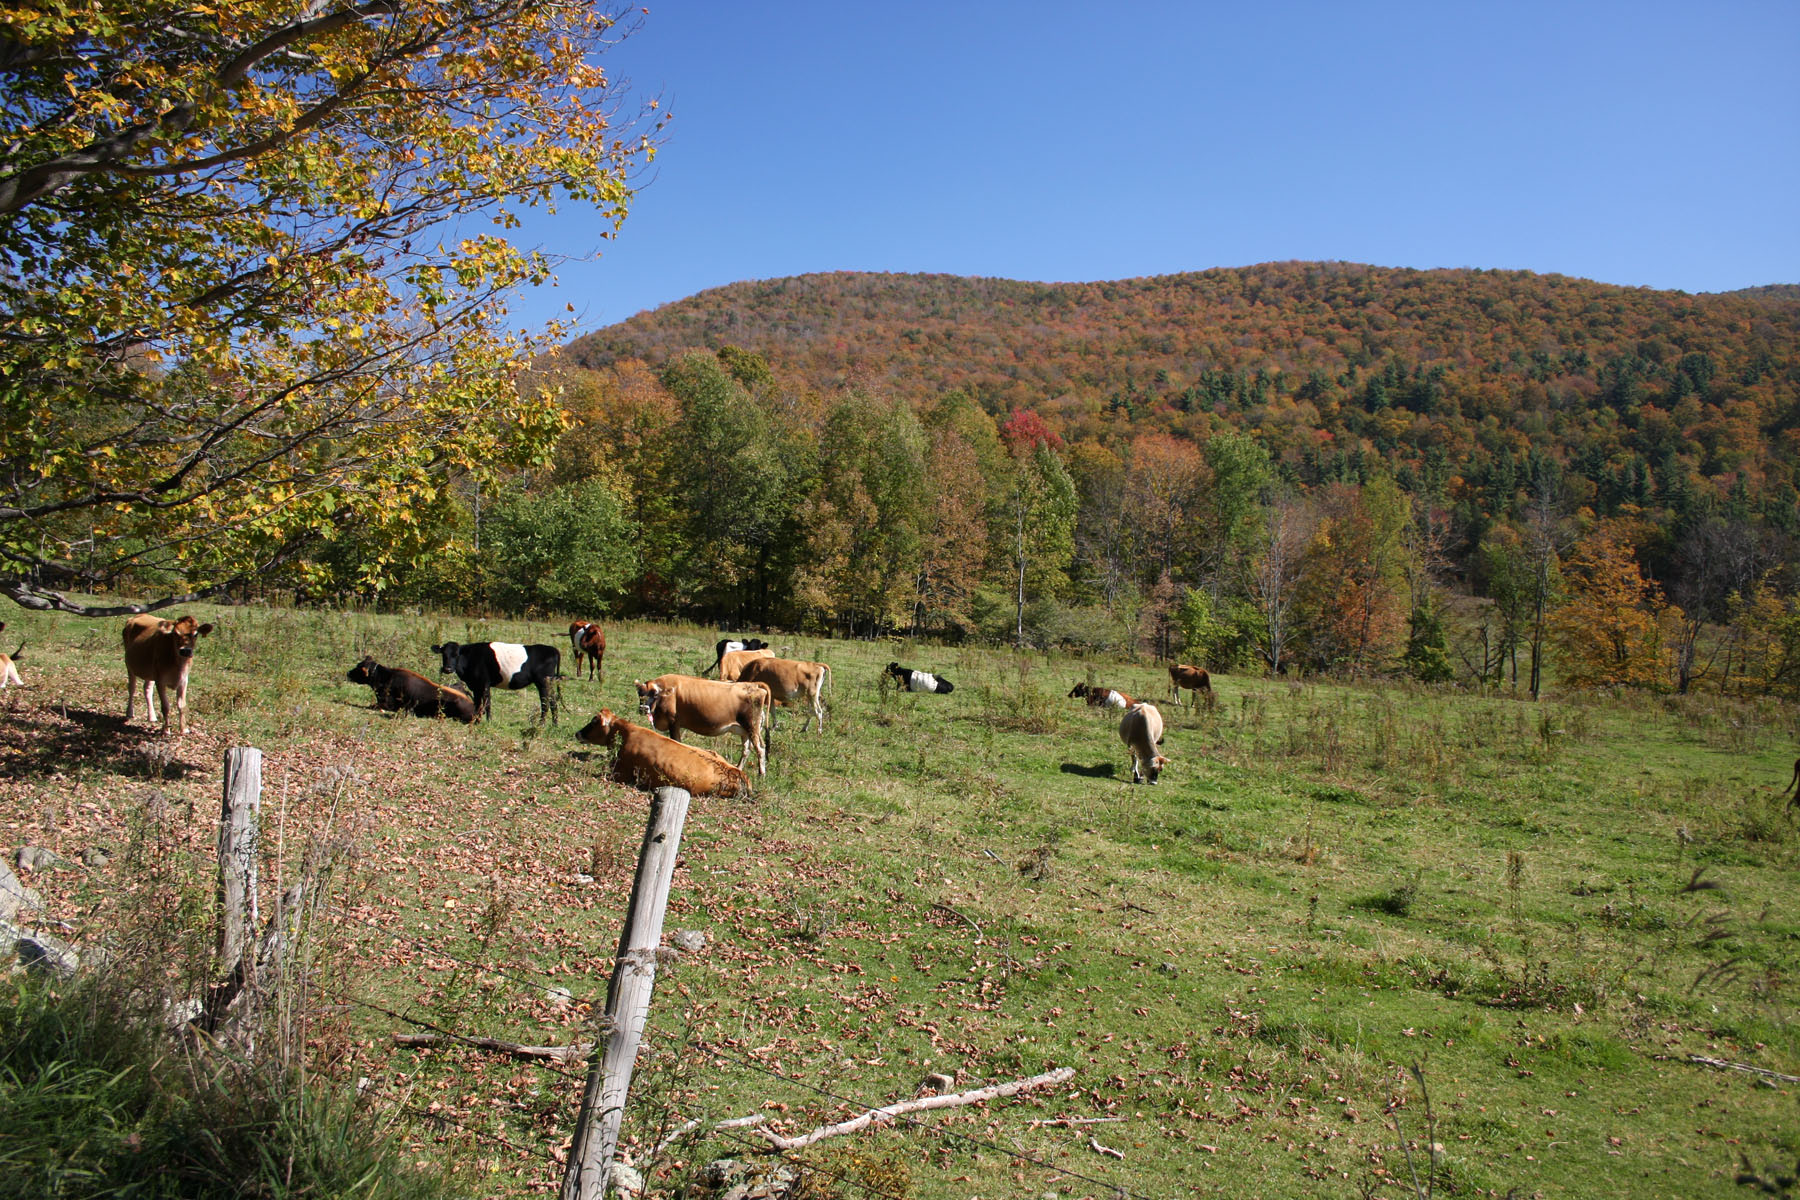 Lazy Cows Watching the Foliage (user submitted)